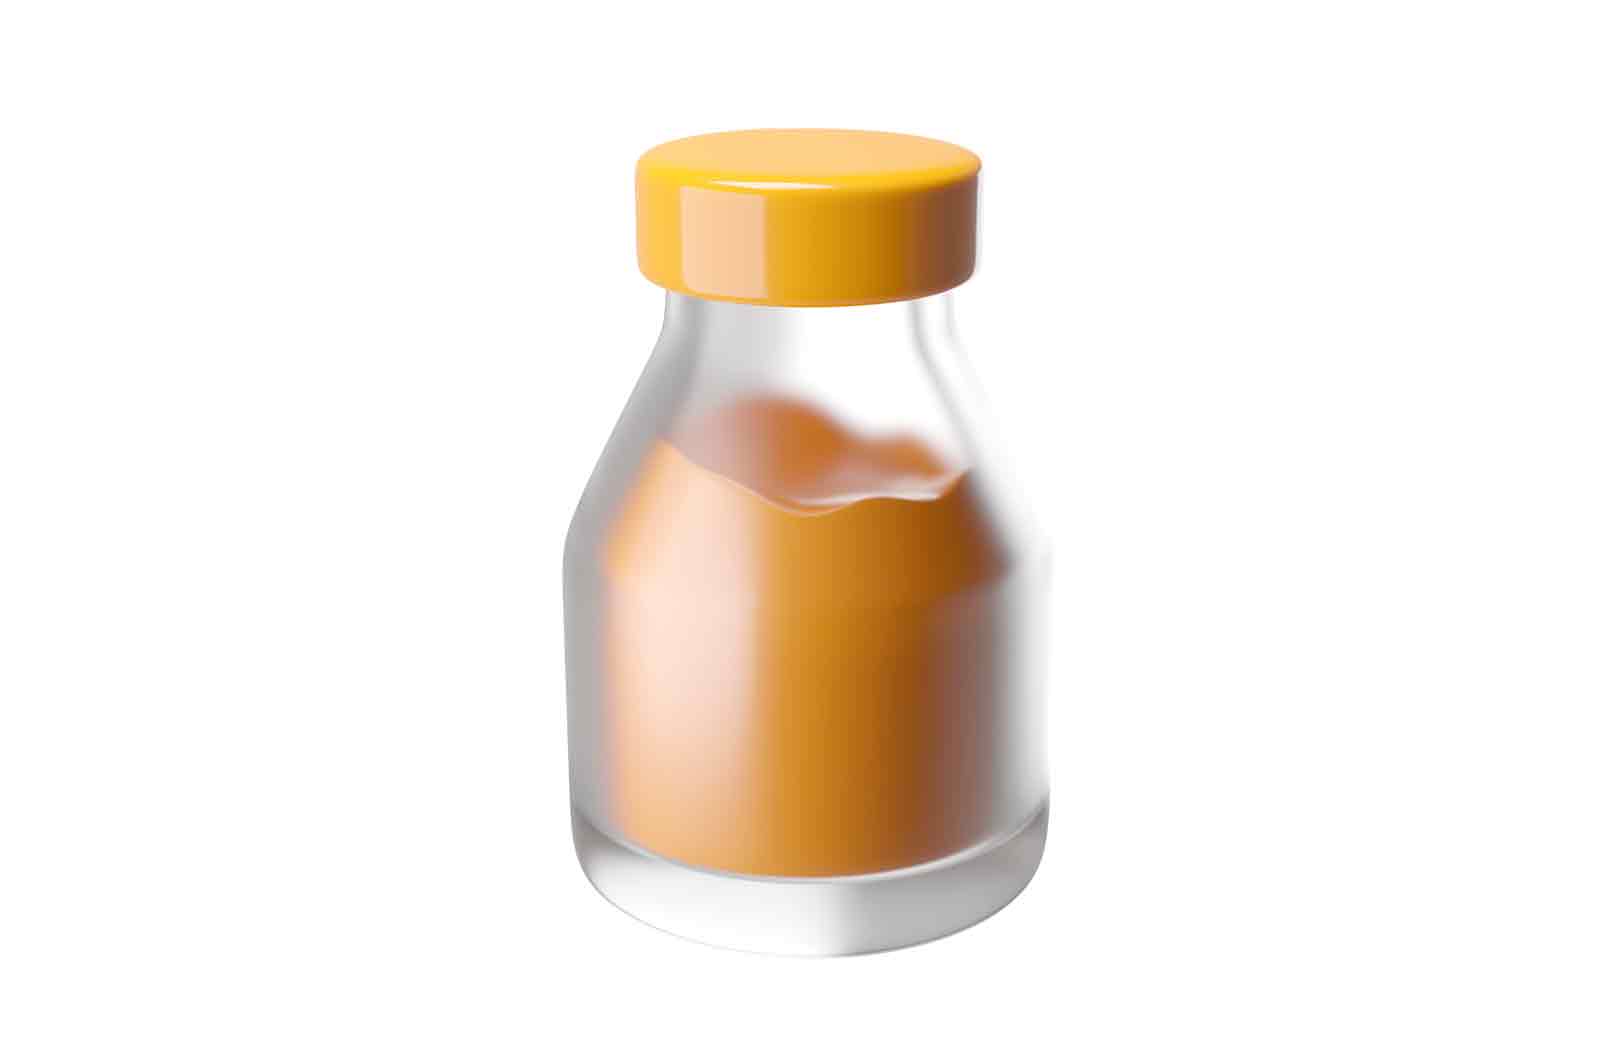 Juice bottle, 3d rendered illustration of a small glass container with a yellow cap.